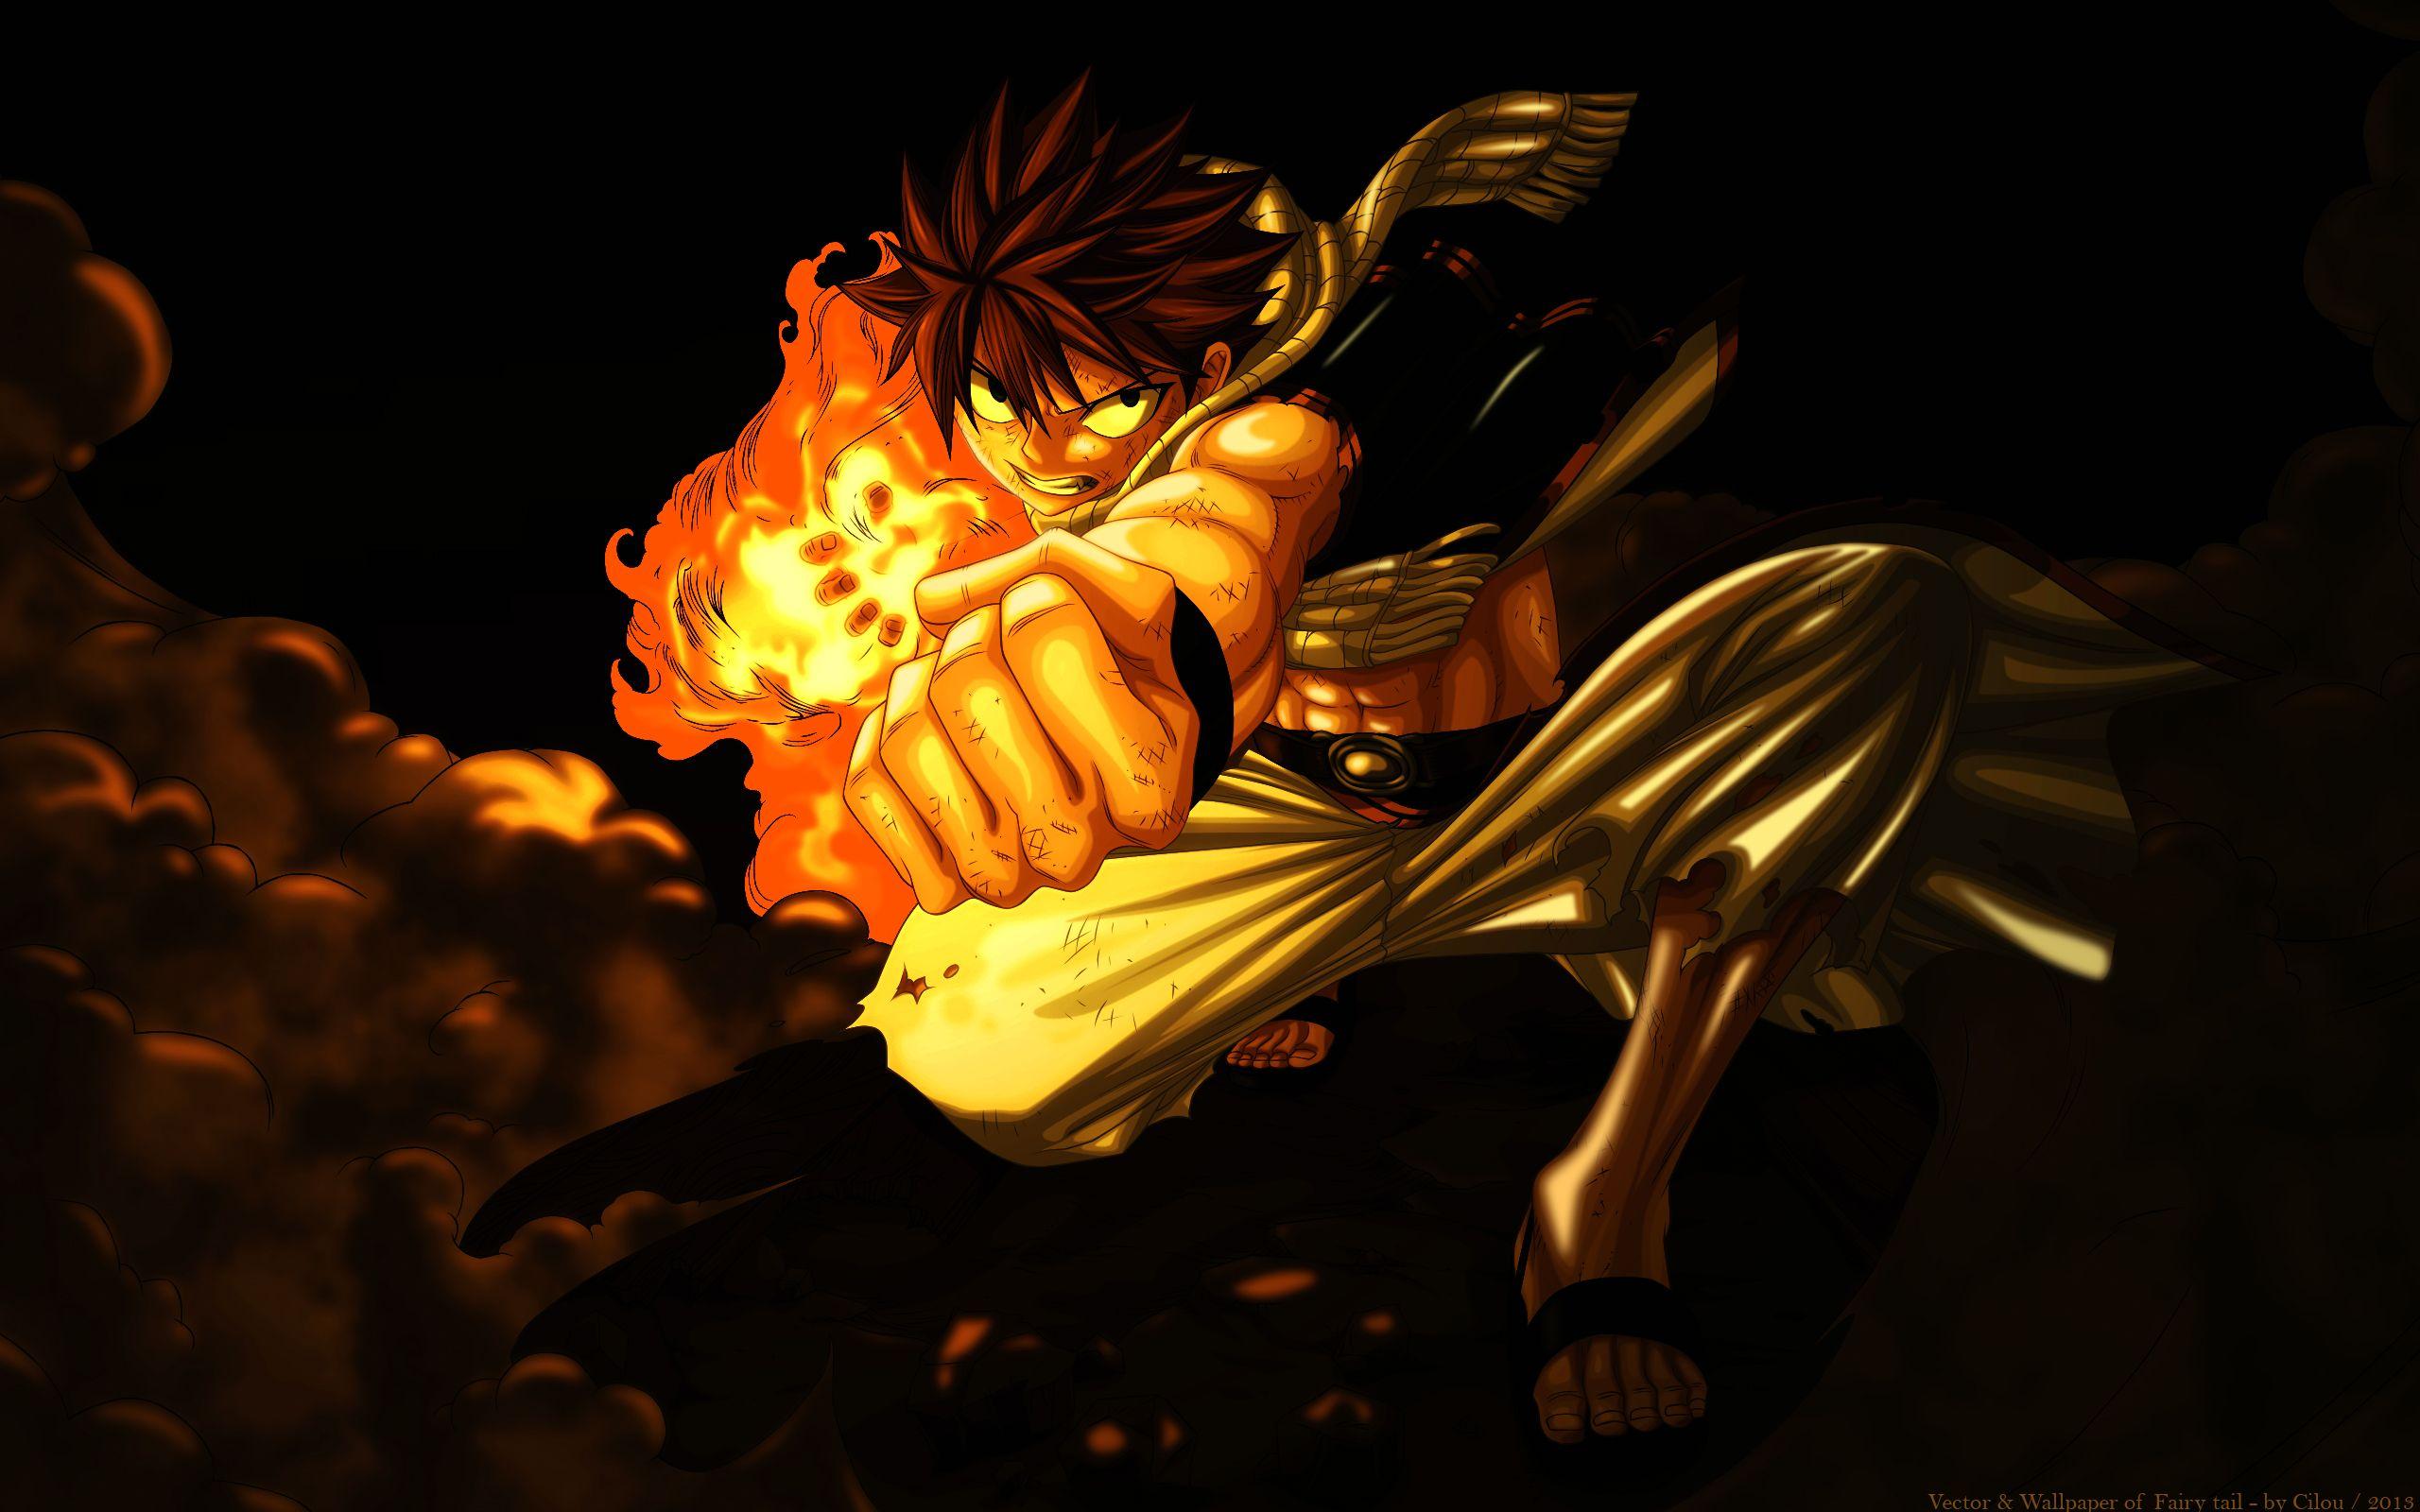 FAIRY TAIL Natsu Dragneel wallpapers